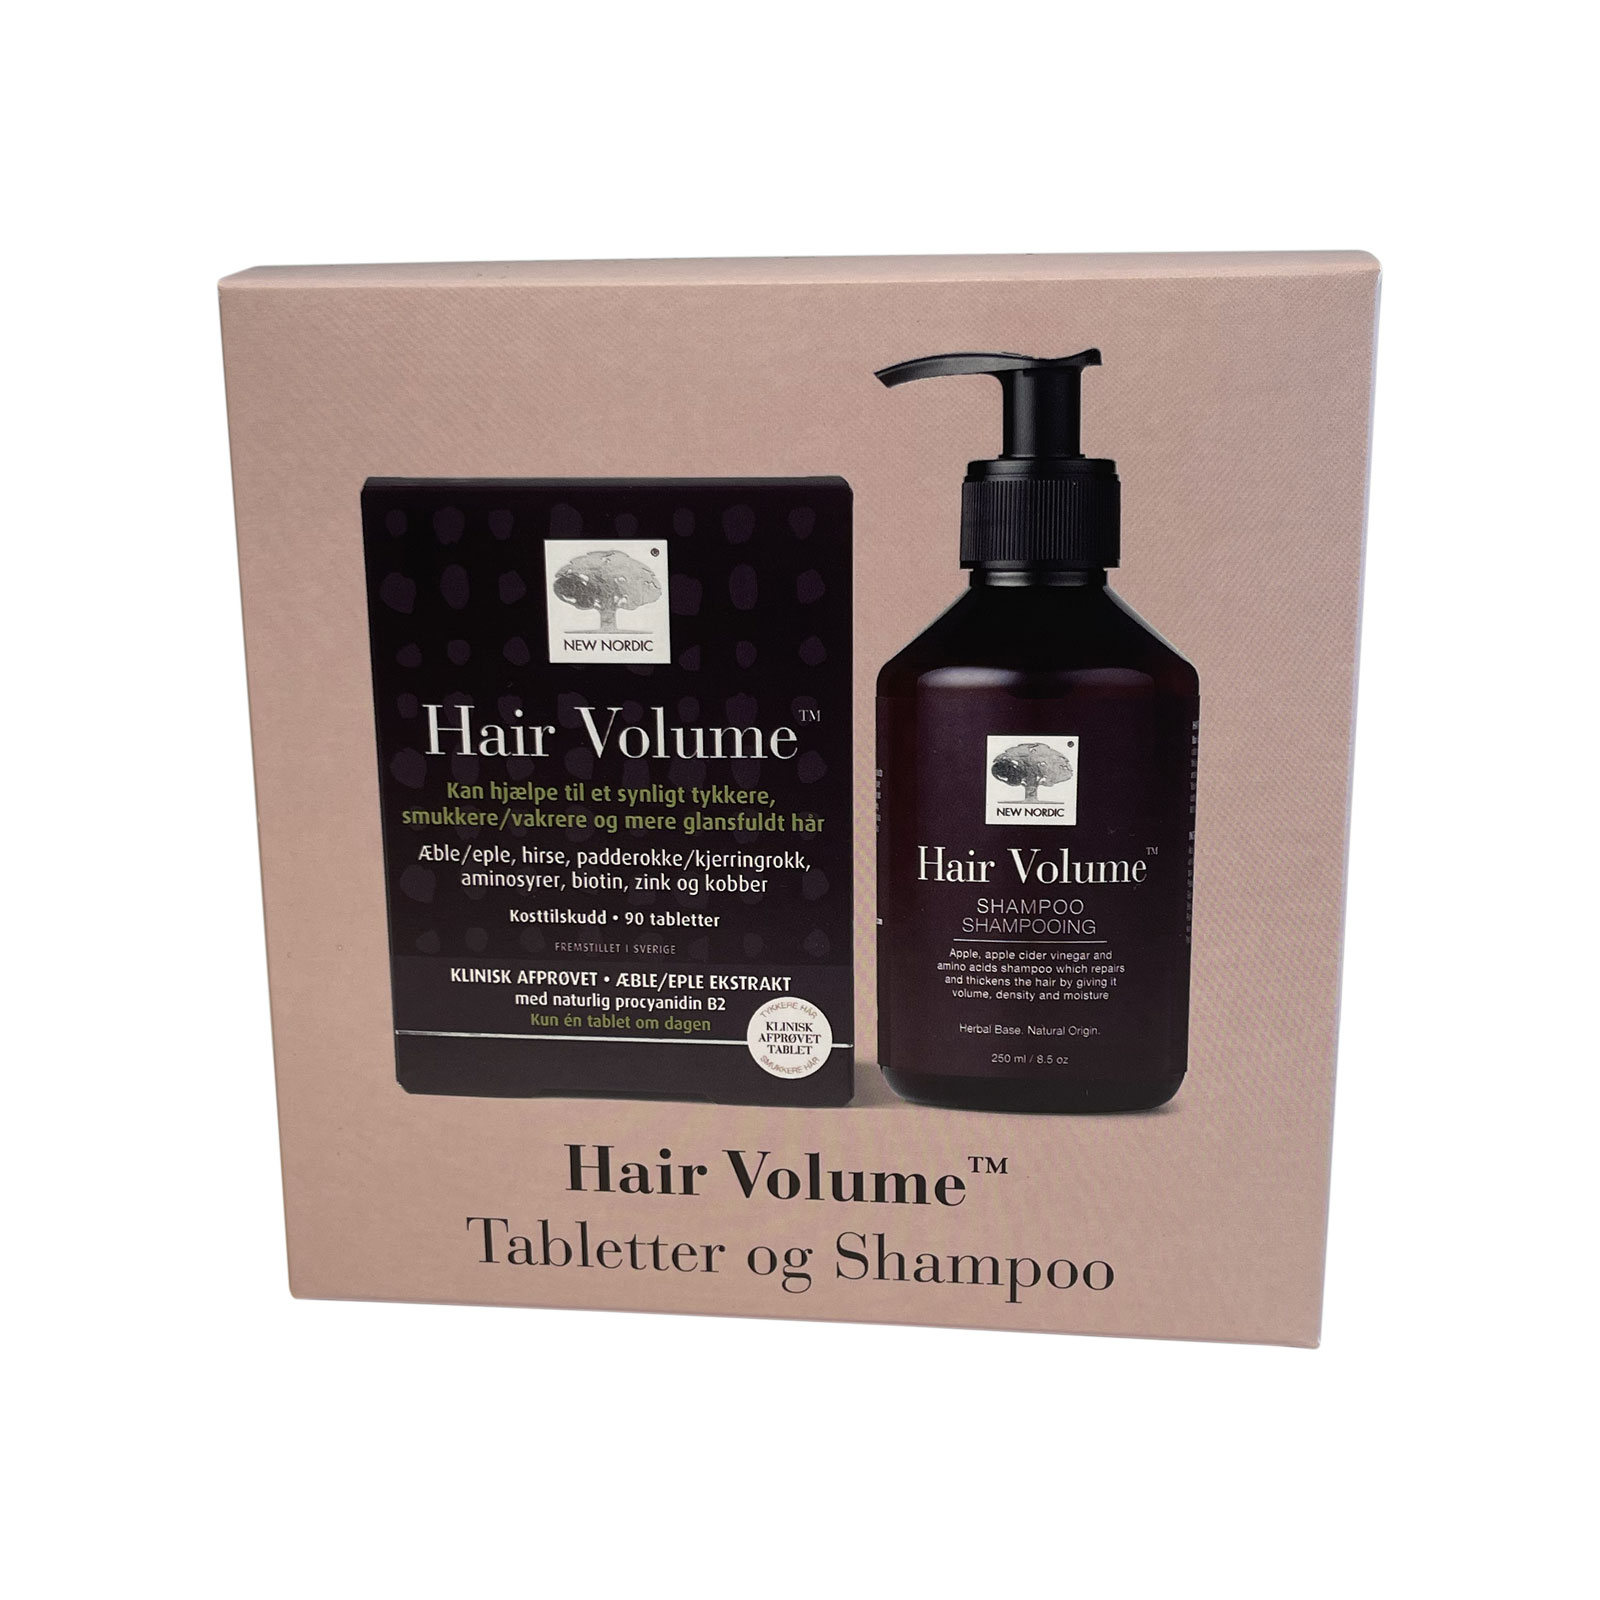 New Nordic Hair Volume duo pack tabletter/shampoo